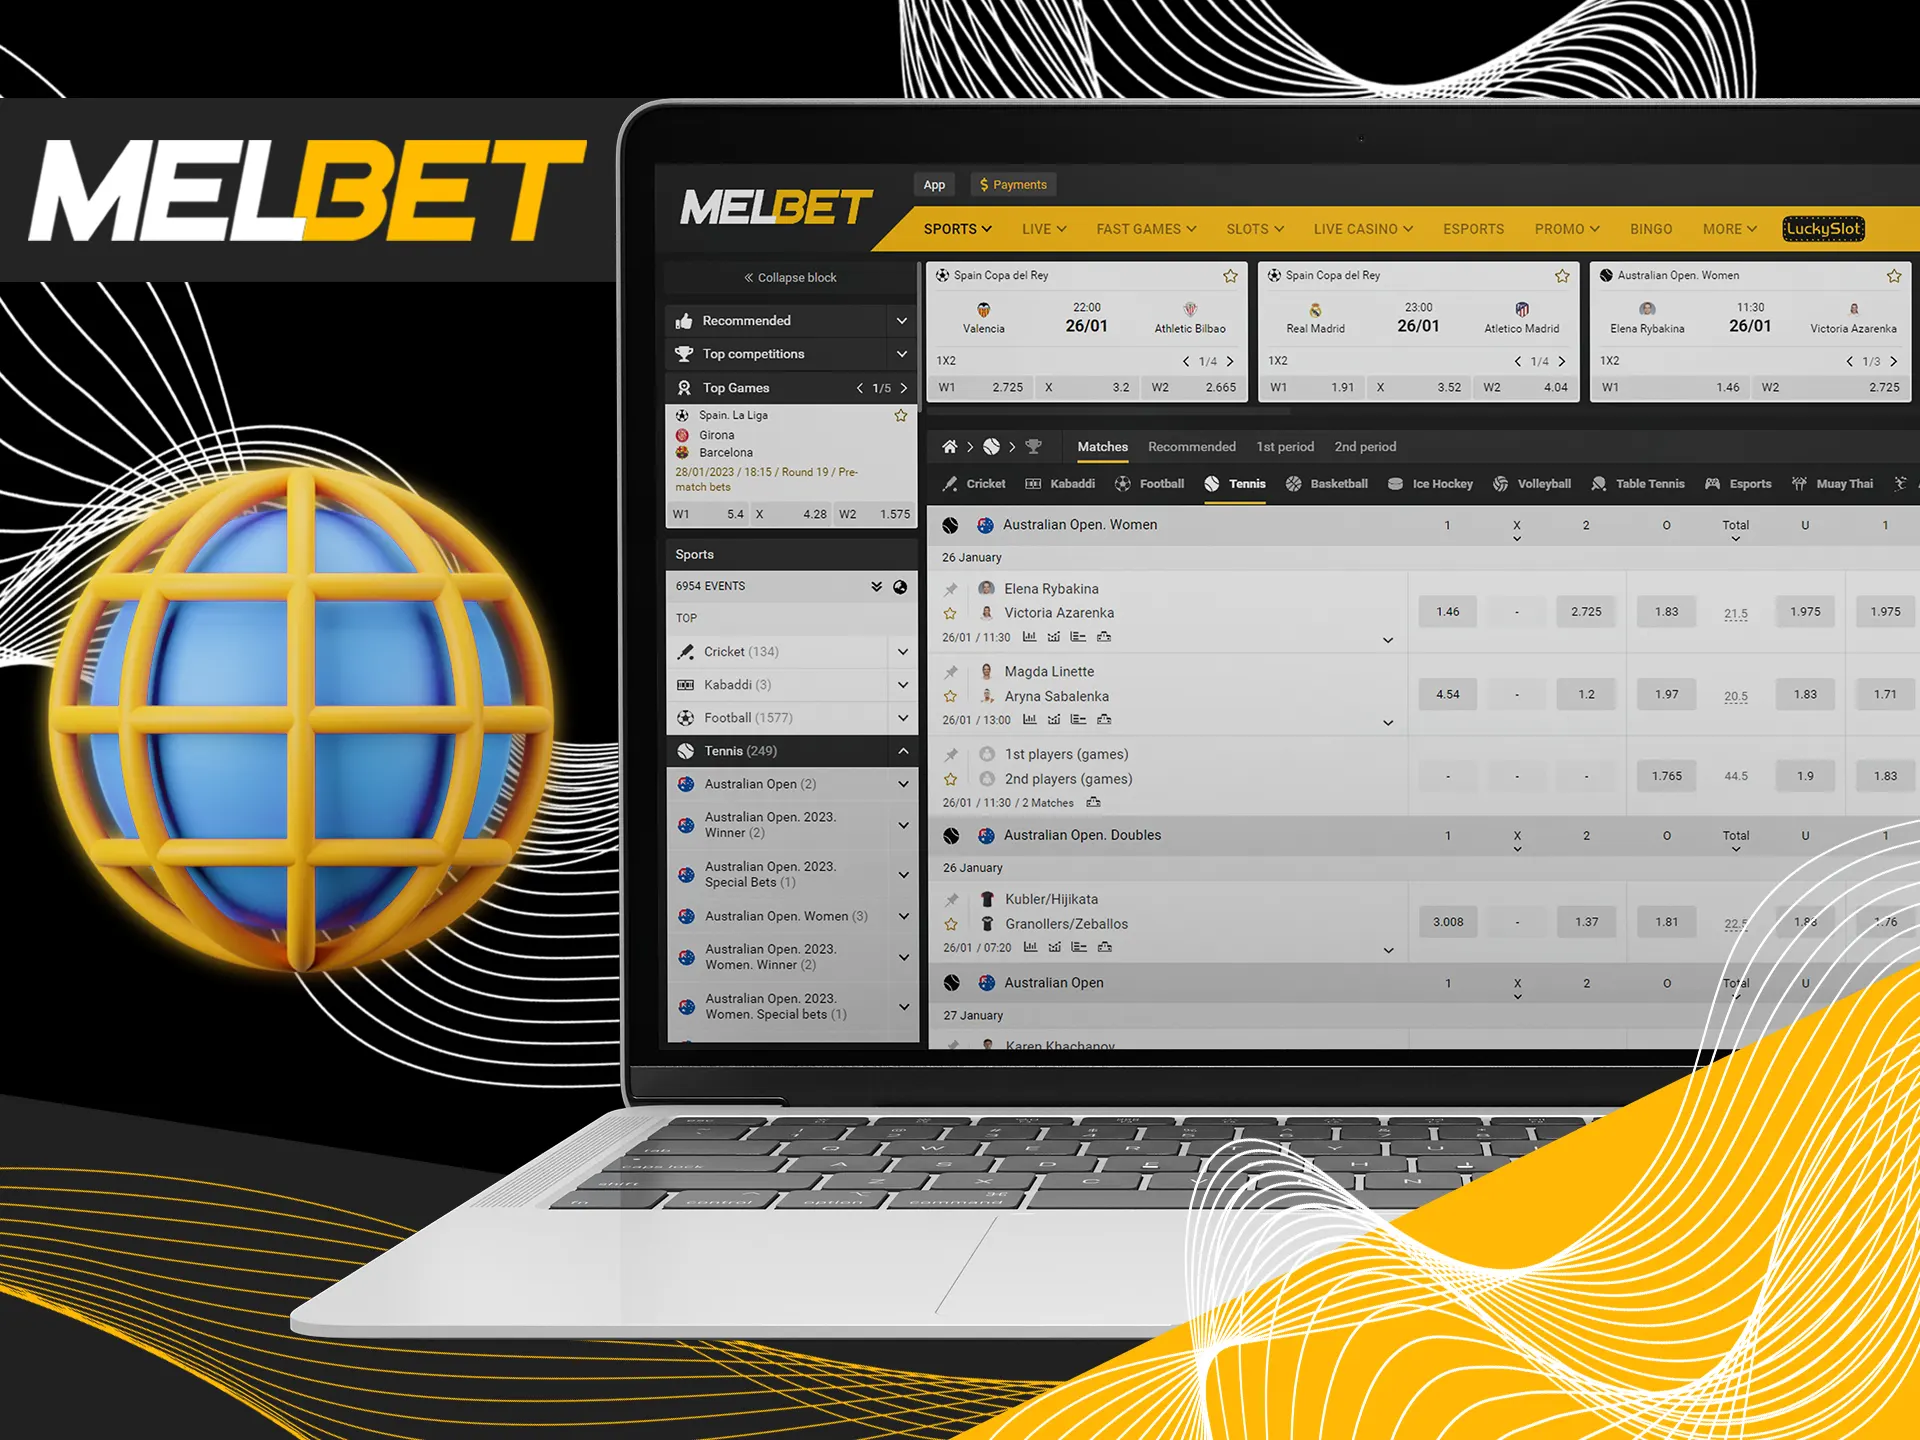 Run website version of Melbet on any device.